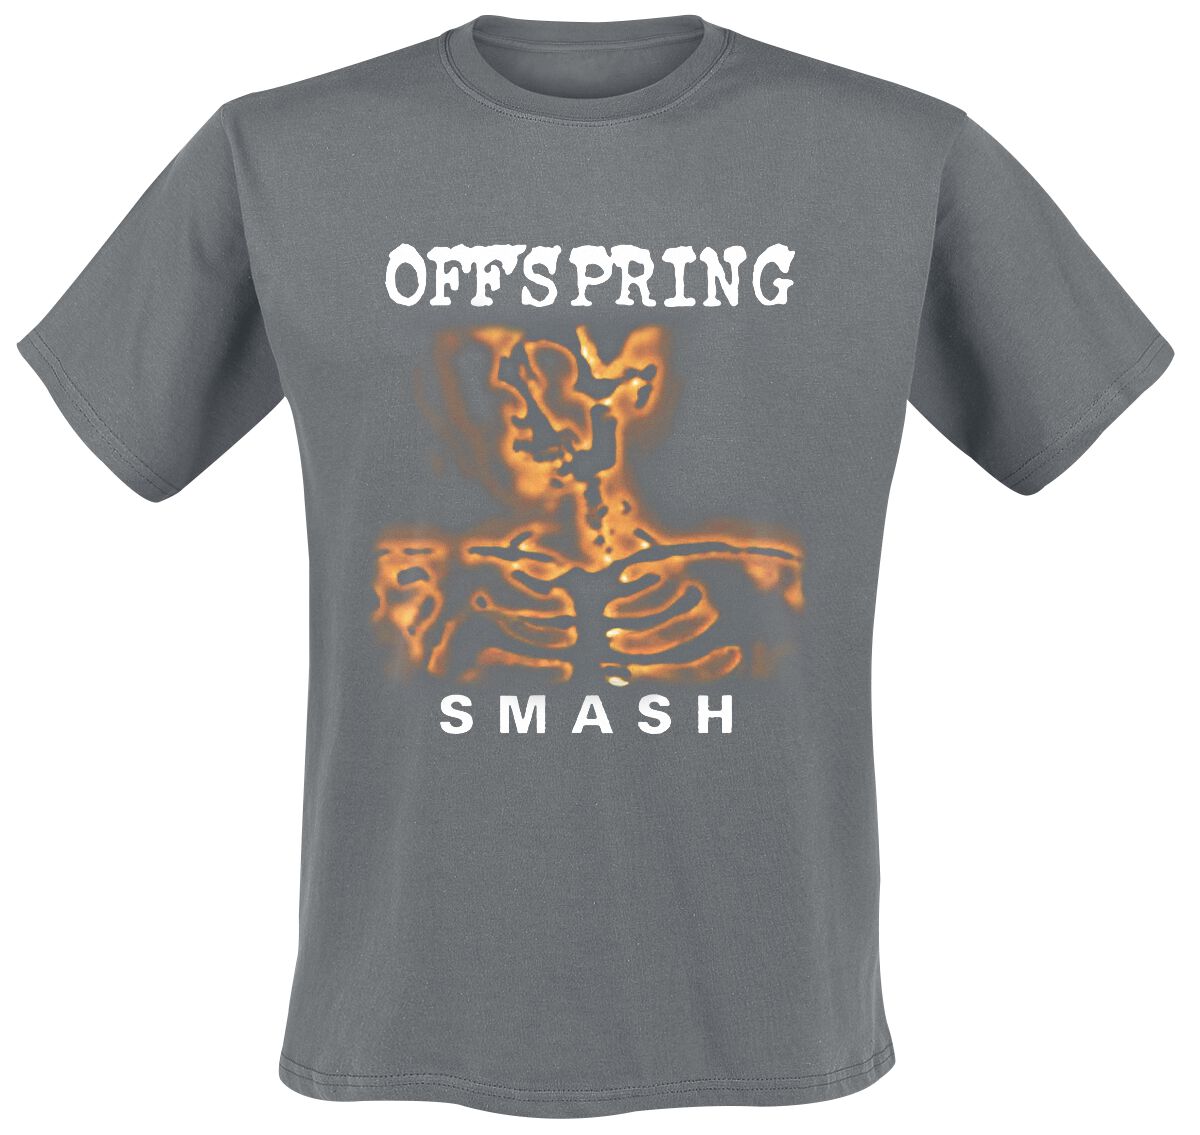 Image of The Offspring Smash T-Shirt charcoal